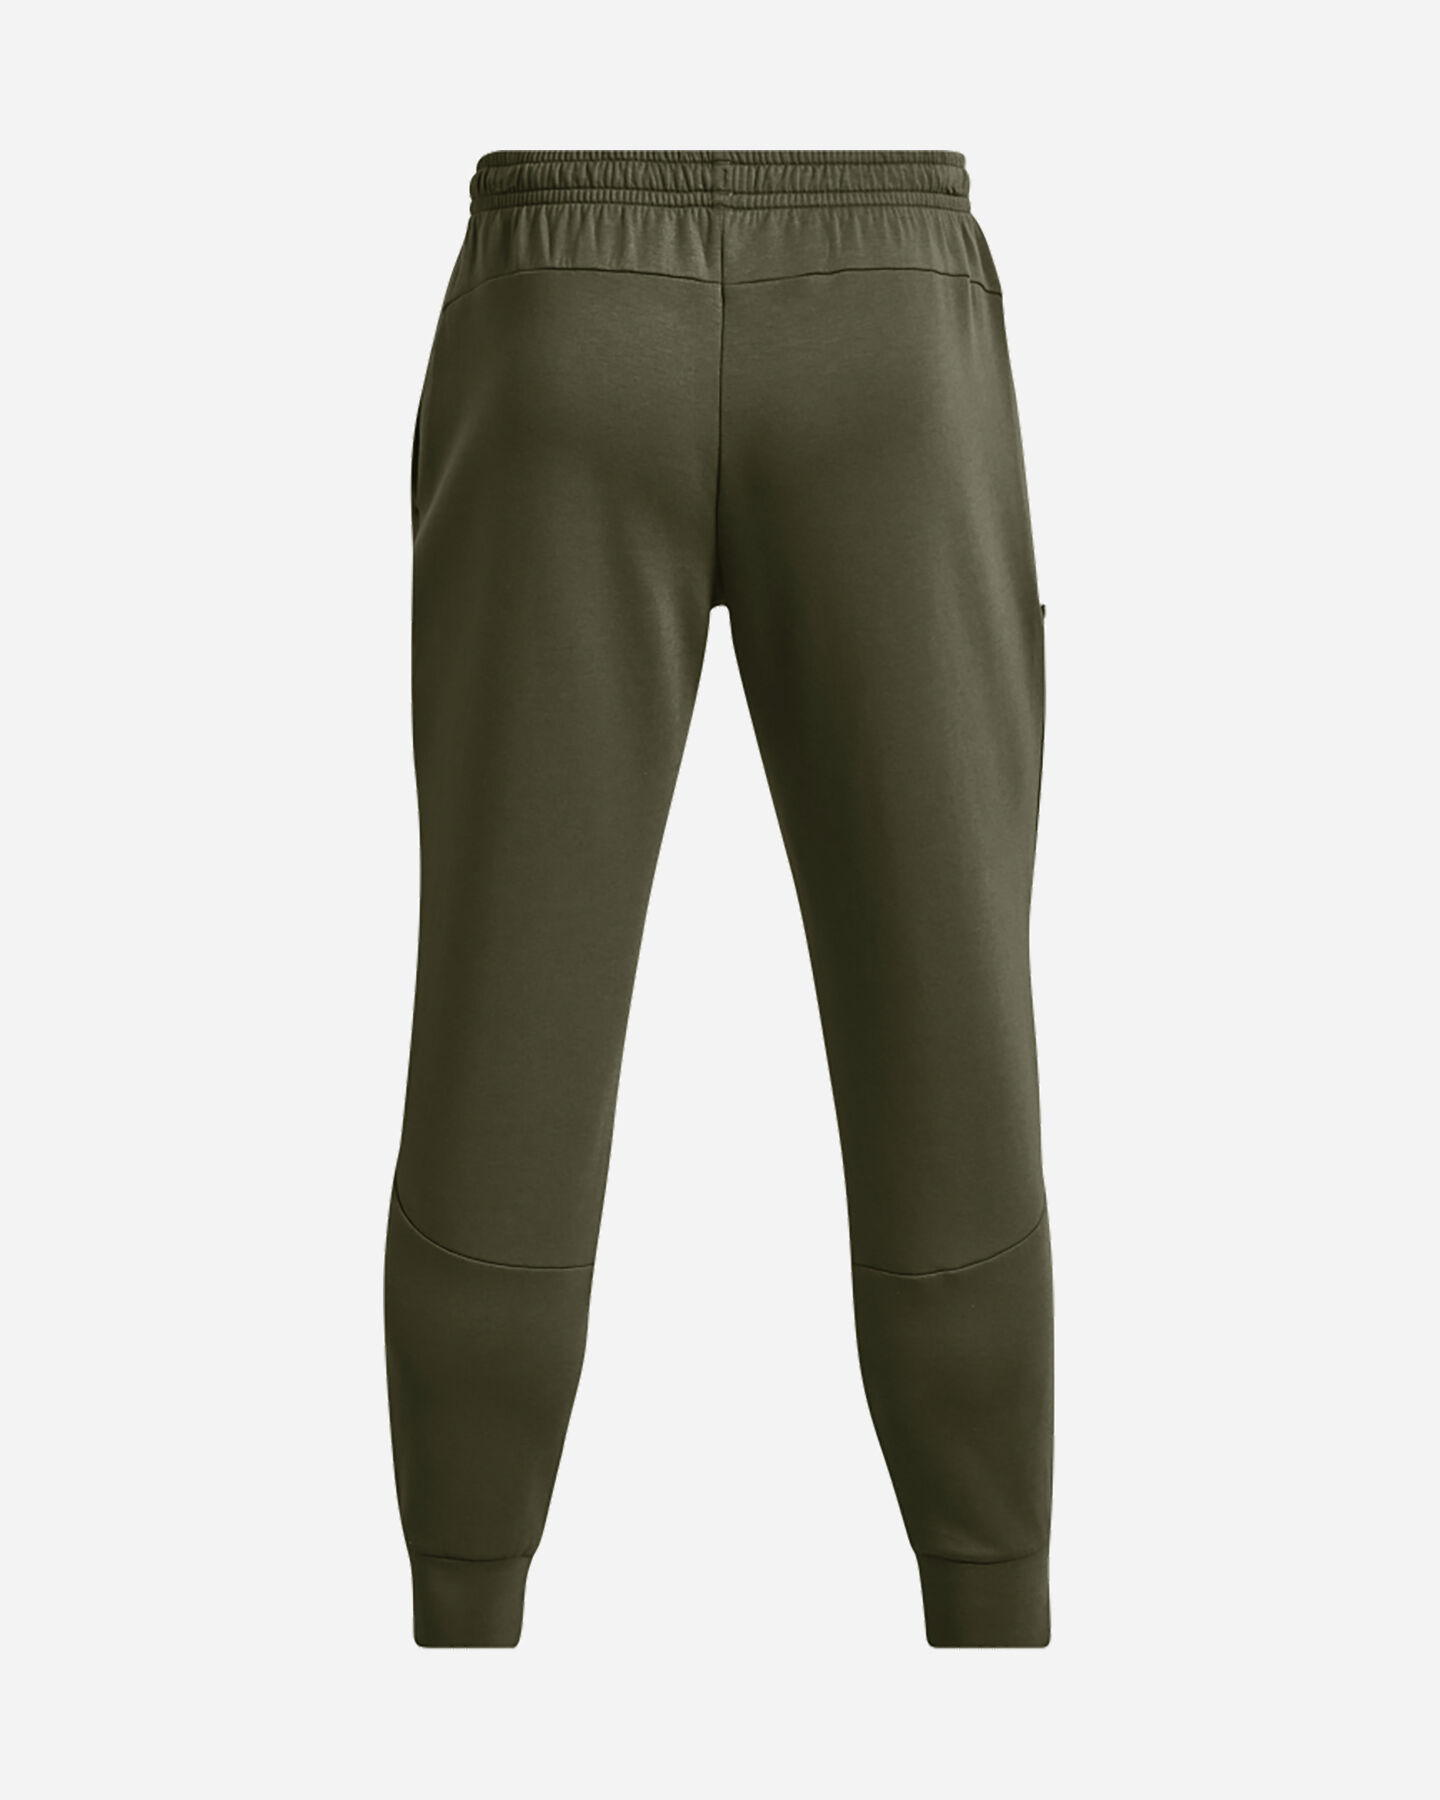  Pantalone UNDER ARMOUR UNSTOPPABLE M S5579658|0390|XS scatto 1